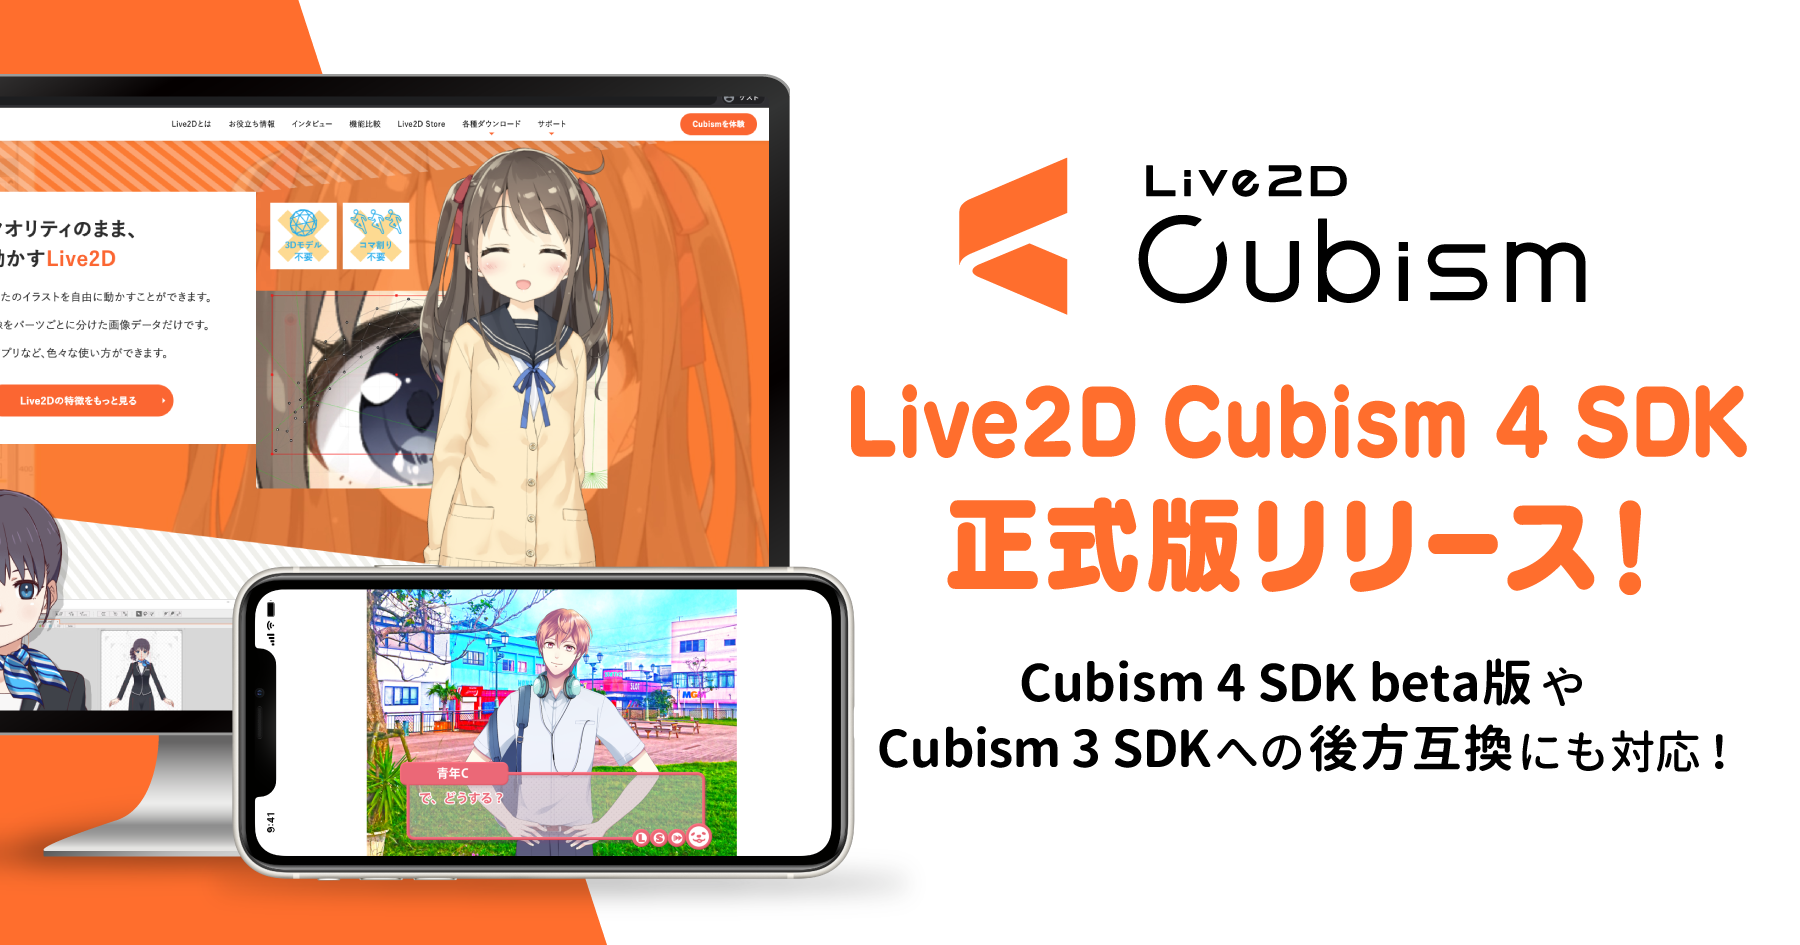 Cubism 4 SDK officially released! Also supports backward compatibility with Cubism 4 SDK beta version and Cubism 3 SDK.